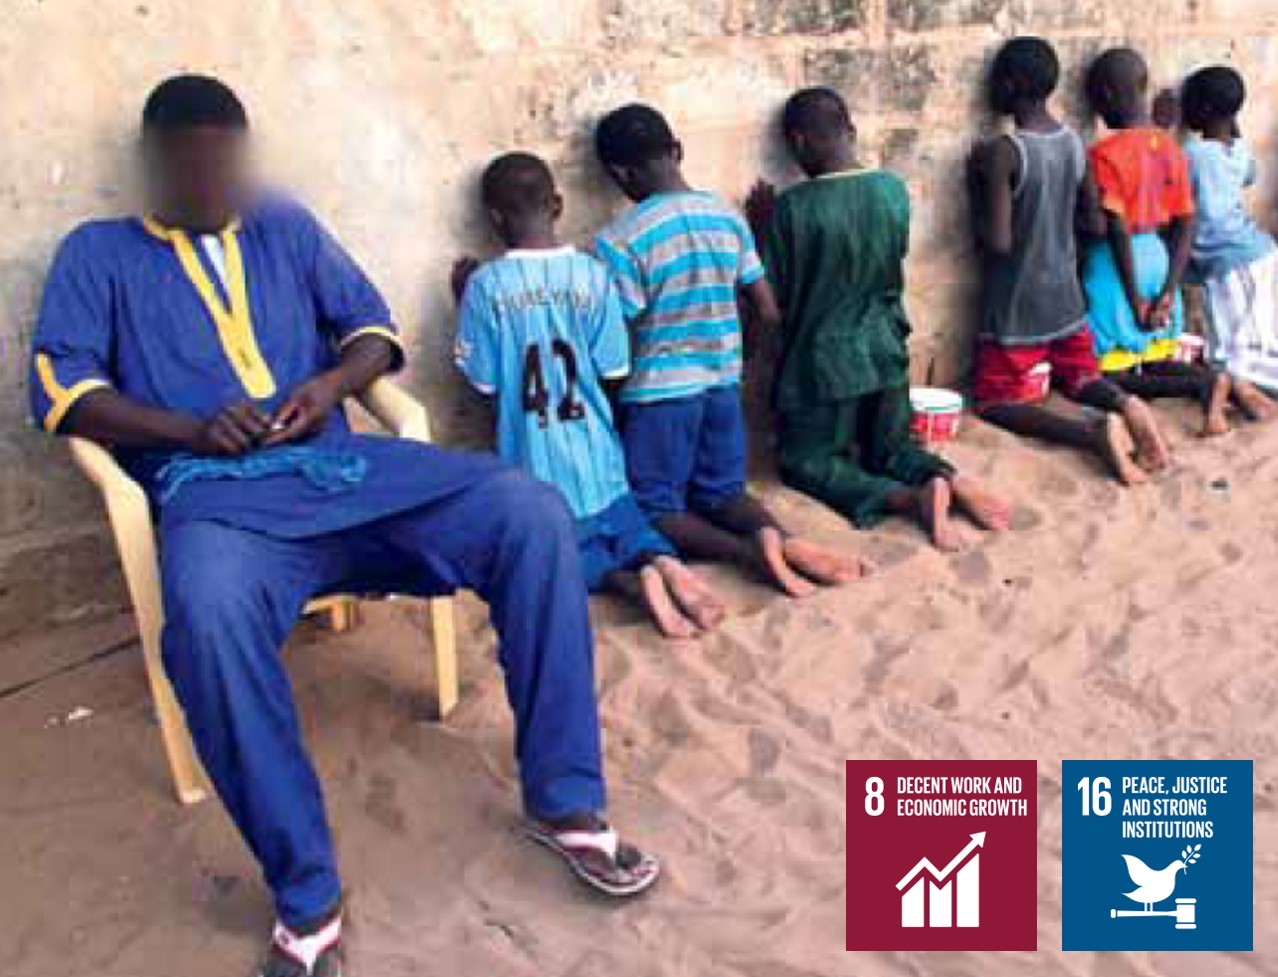 Children lined up along a wall with their backs toward the camera. The logos of SDG 8 and SDG 16 are featured in the corner. 